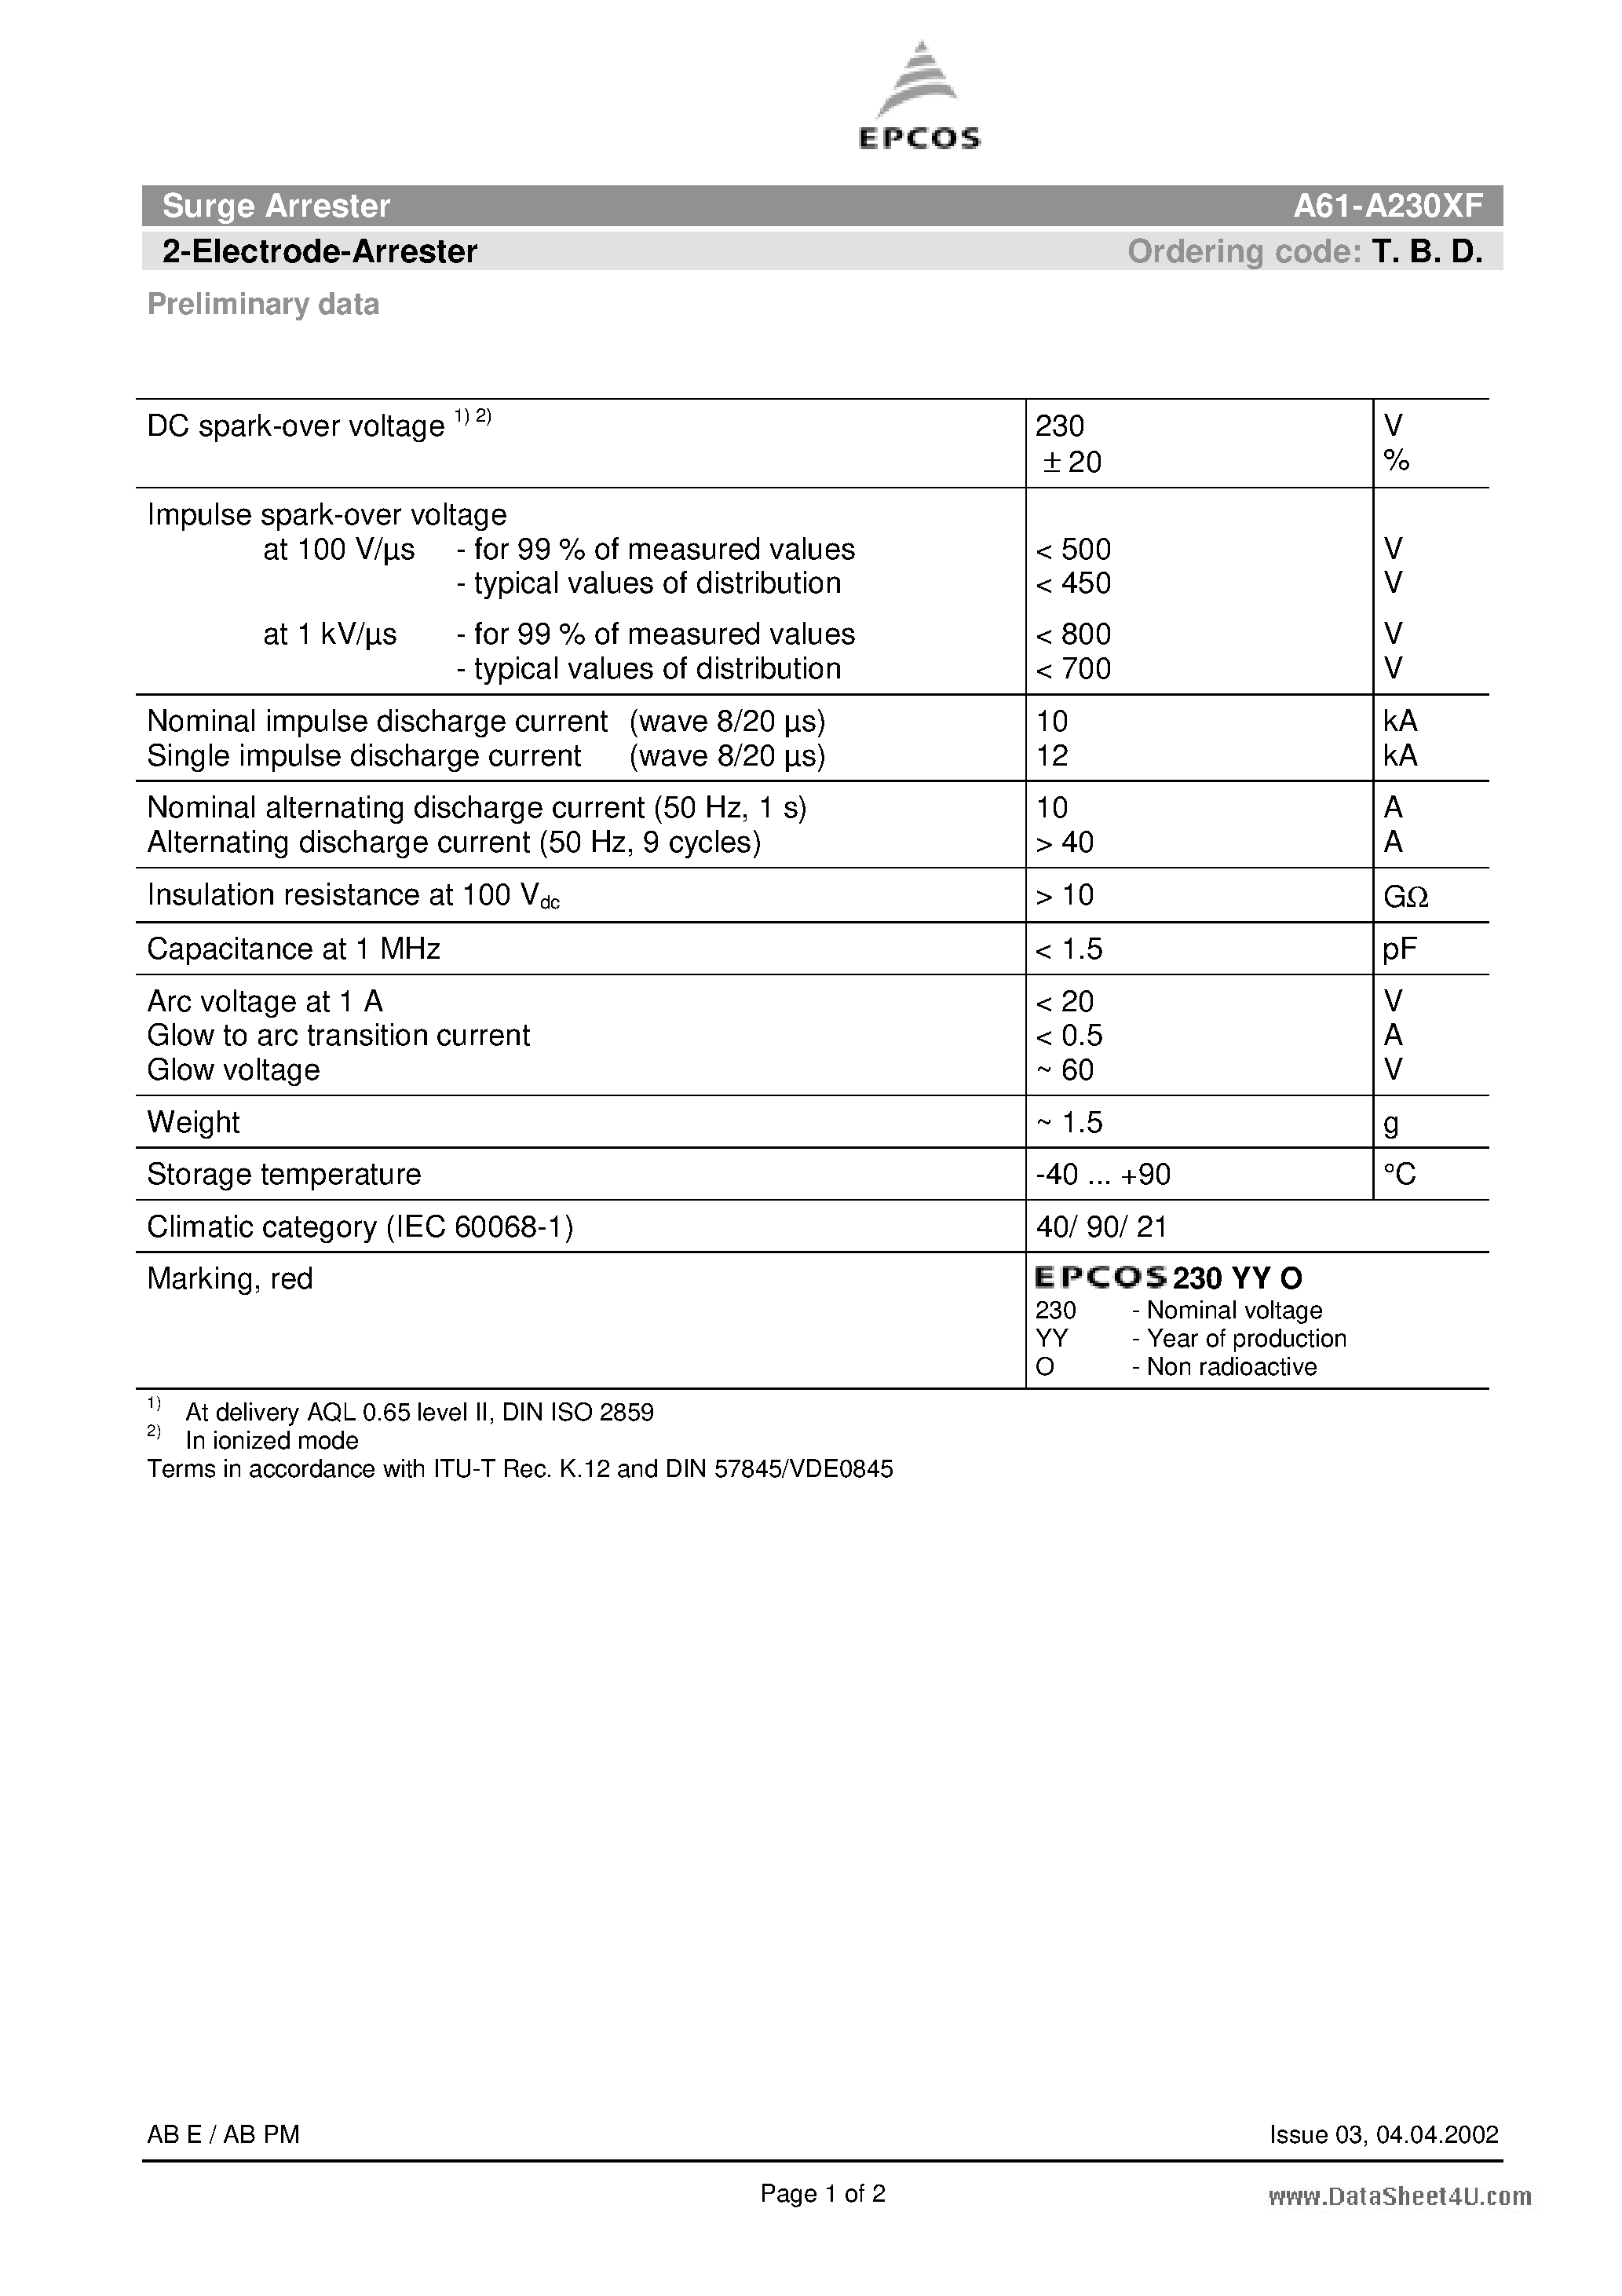 Datasheet A61-A230XF - 2-Electrode-Arrester page 1